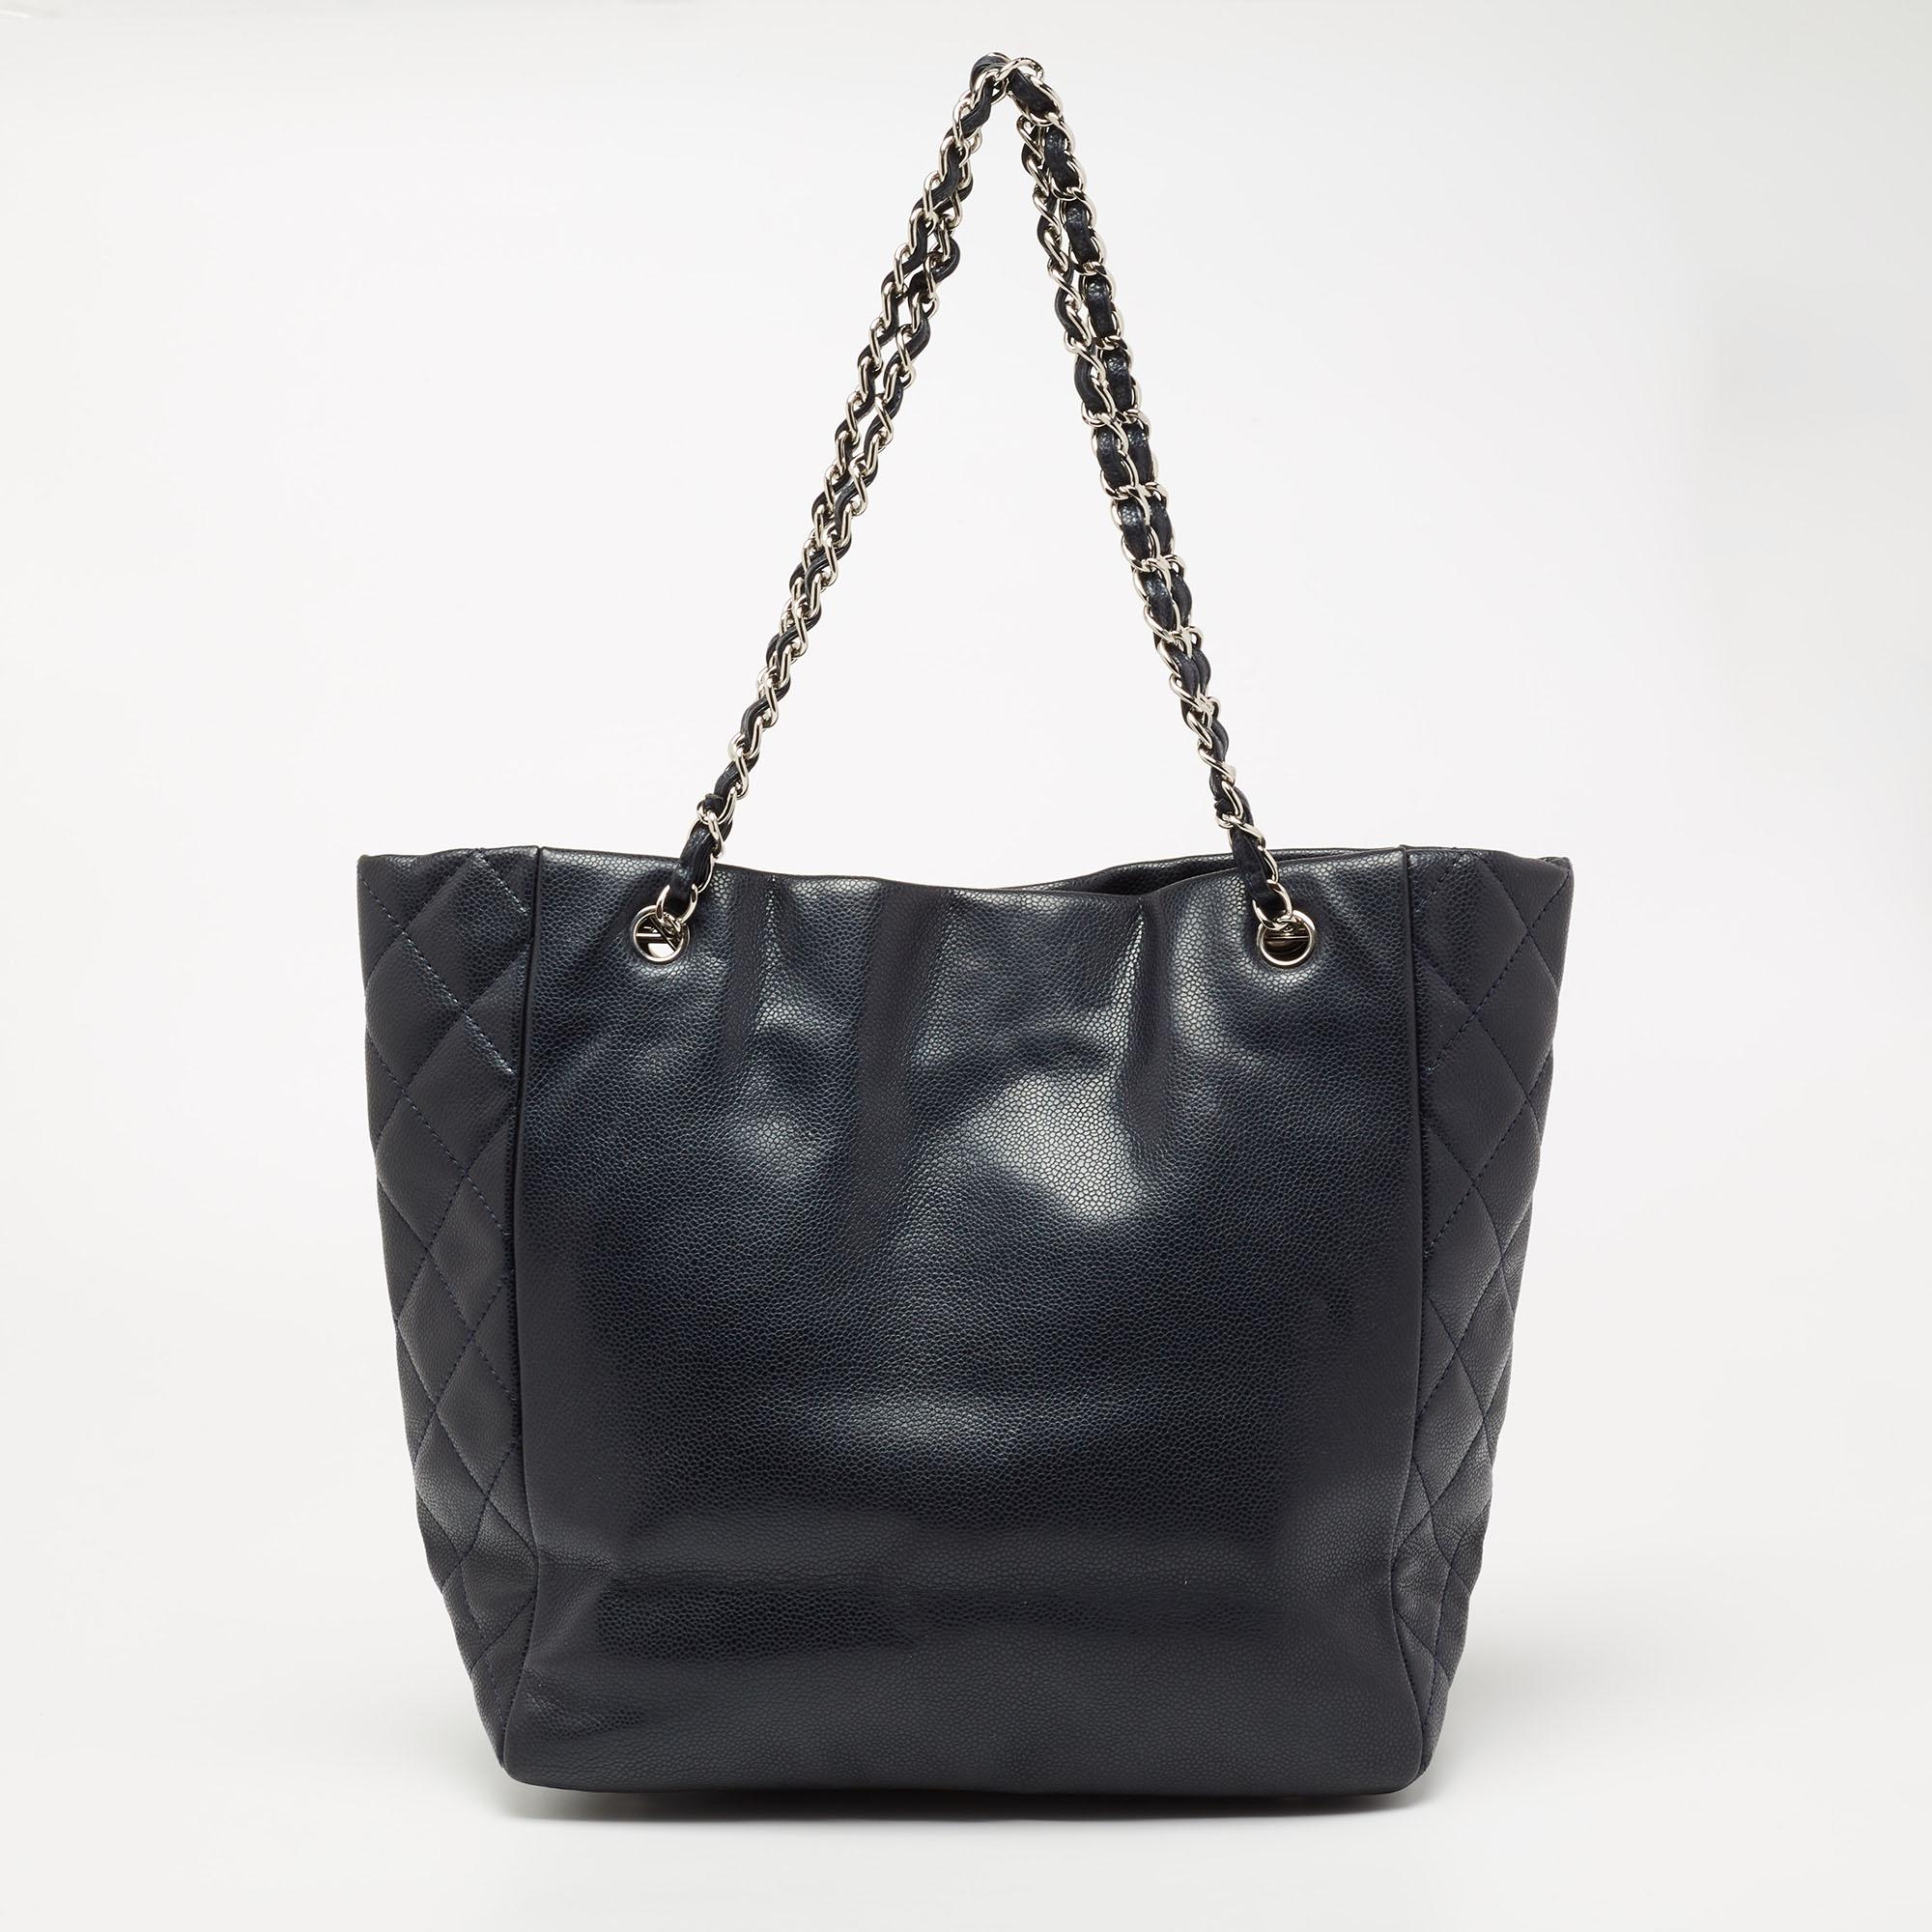 A stylish tote is an everyday staple for all fashionistas! This bag from the house of Chanel is crafted from leather and covered in its timeless quilt pattern on the sides. The piece reveals a capacious fabric interior. It is truly sleek and